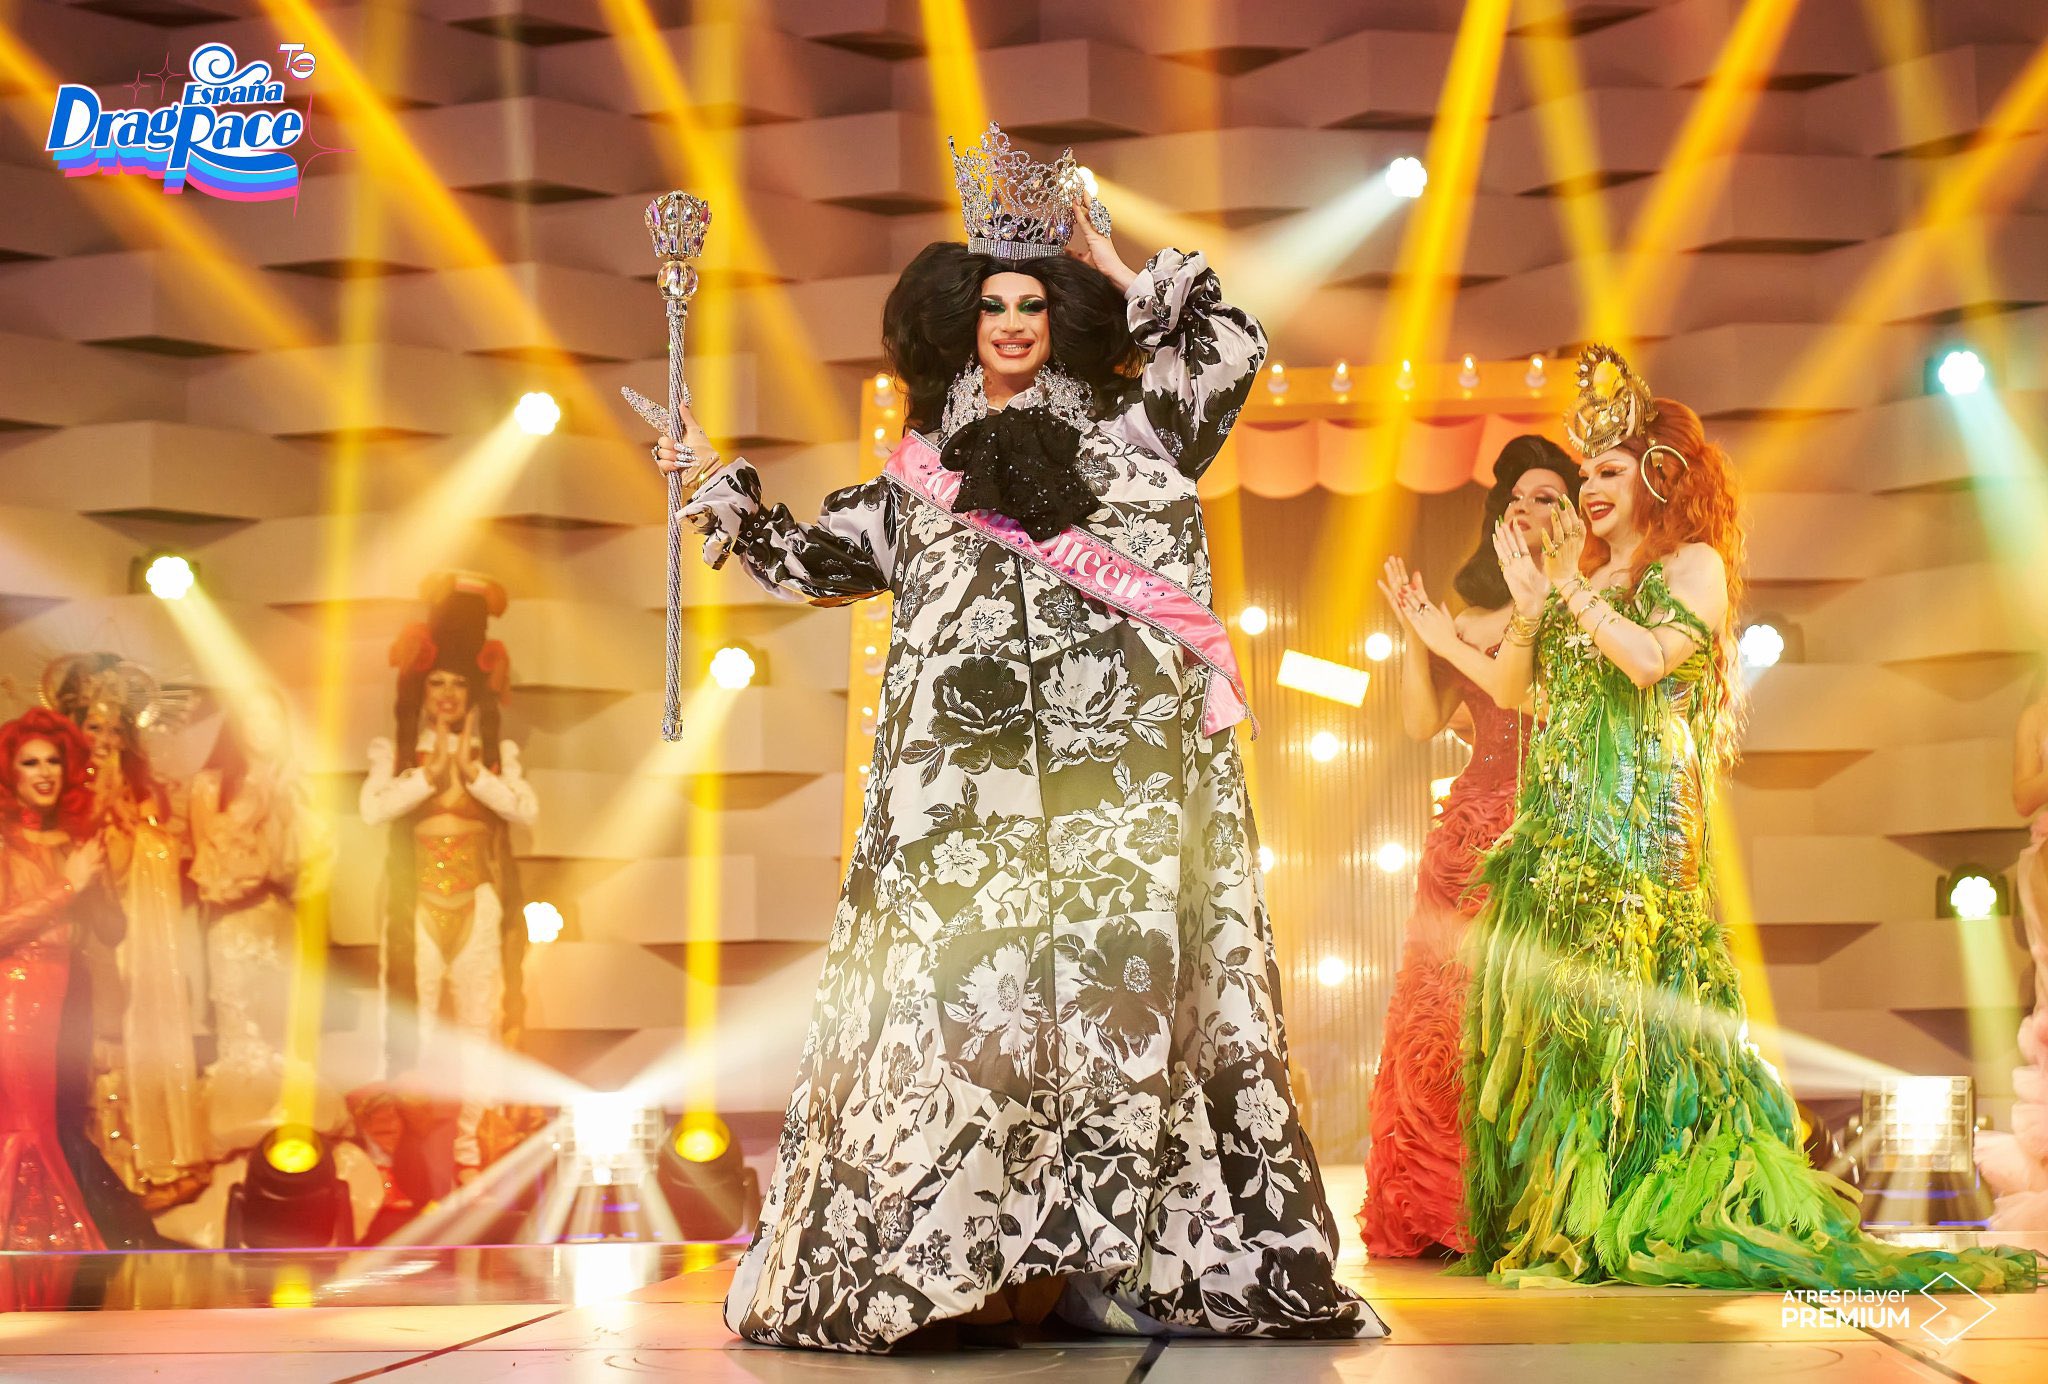 Pitita is crowned as the new Spanish drag superstar in ‘Drag Race España’